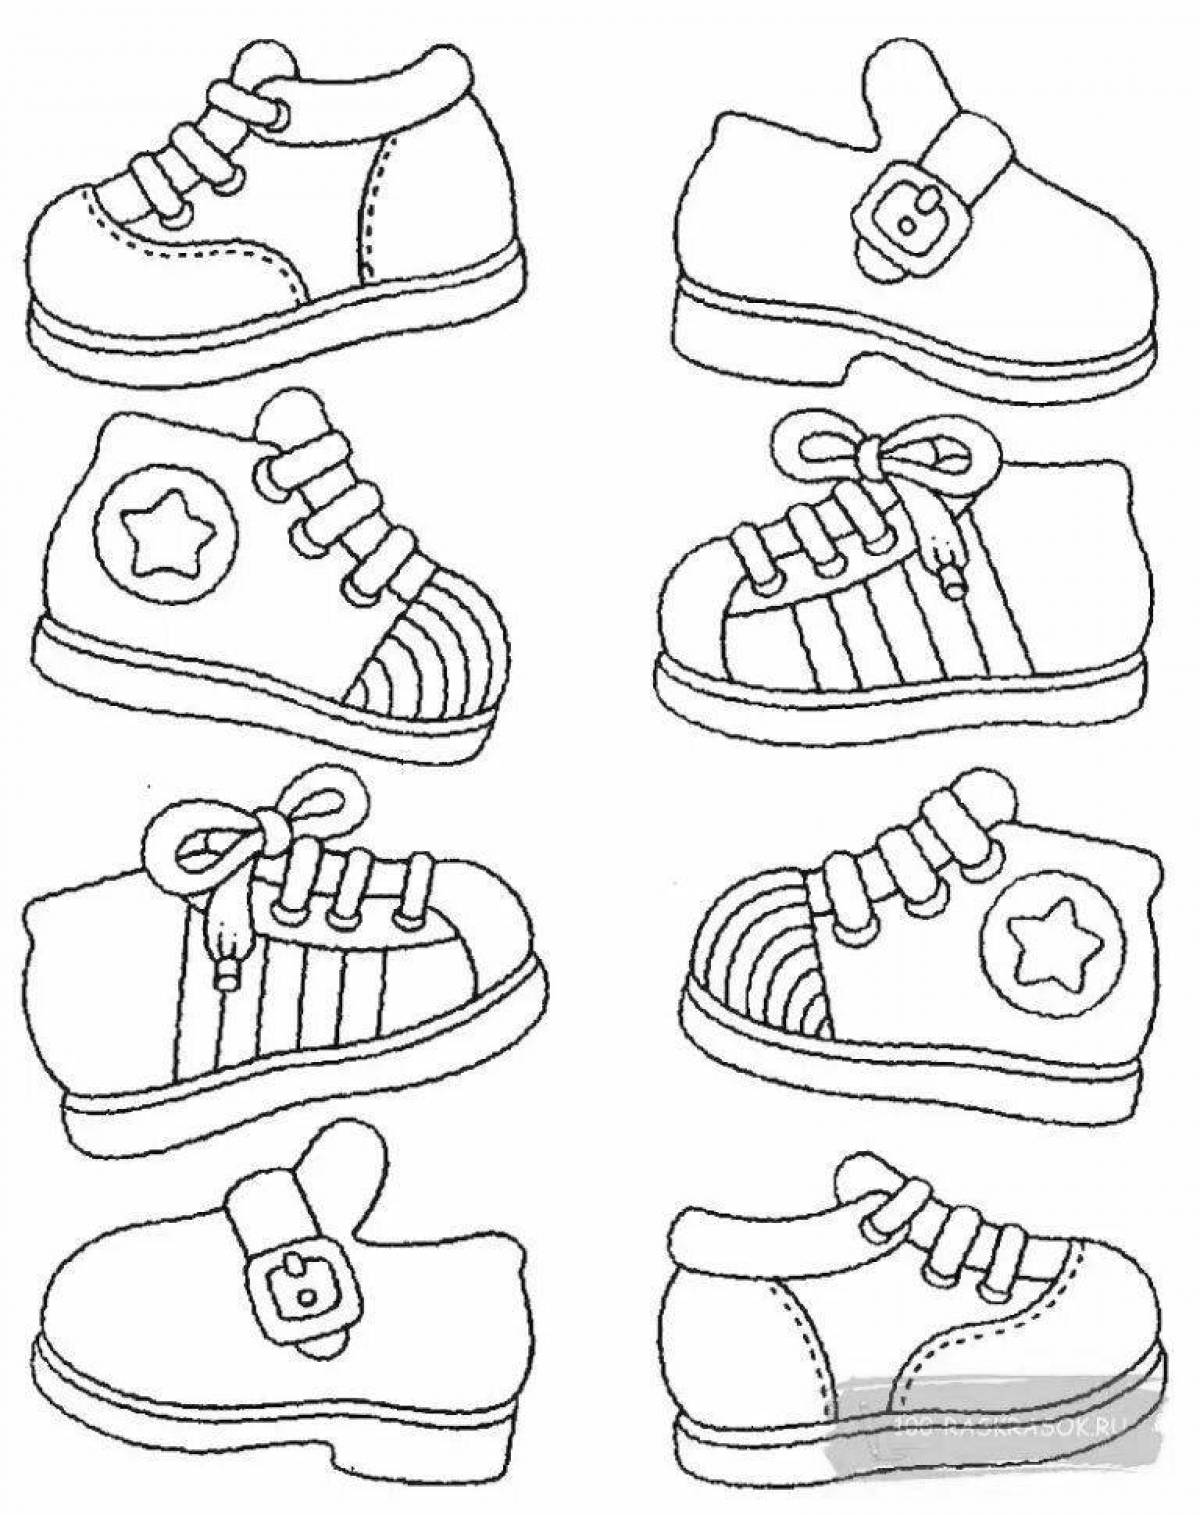 Adorable shoe coloring book for toddlers 3-4 years old